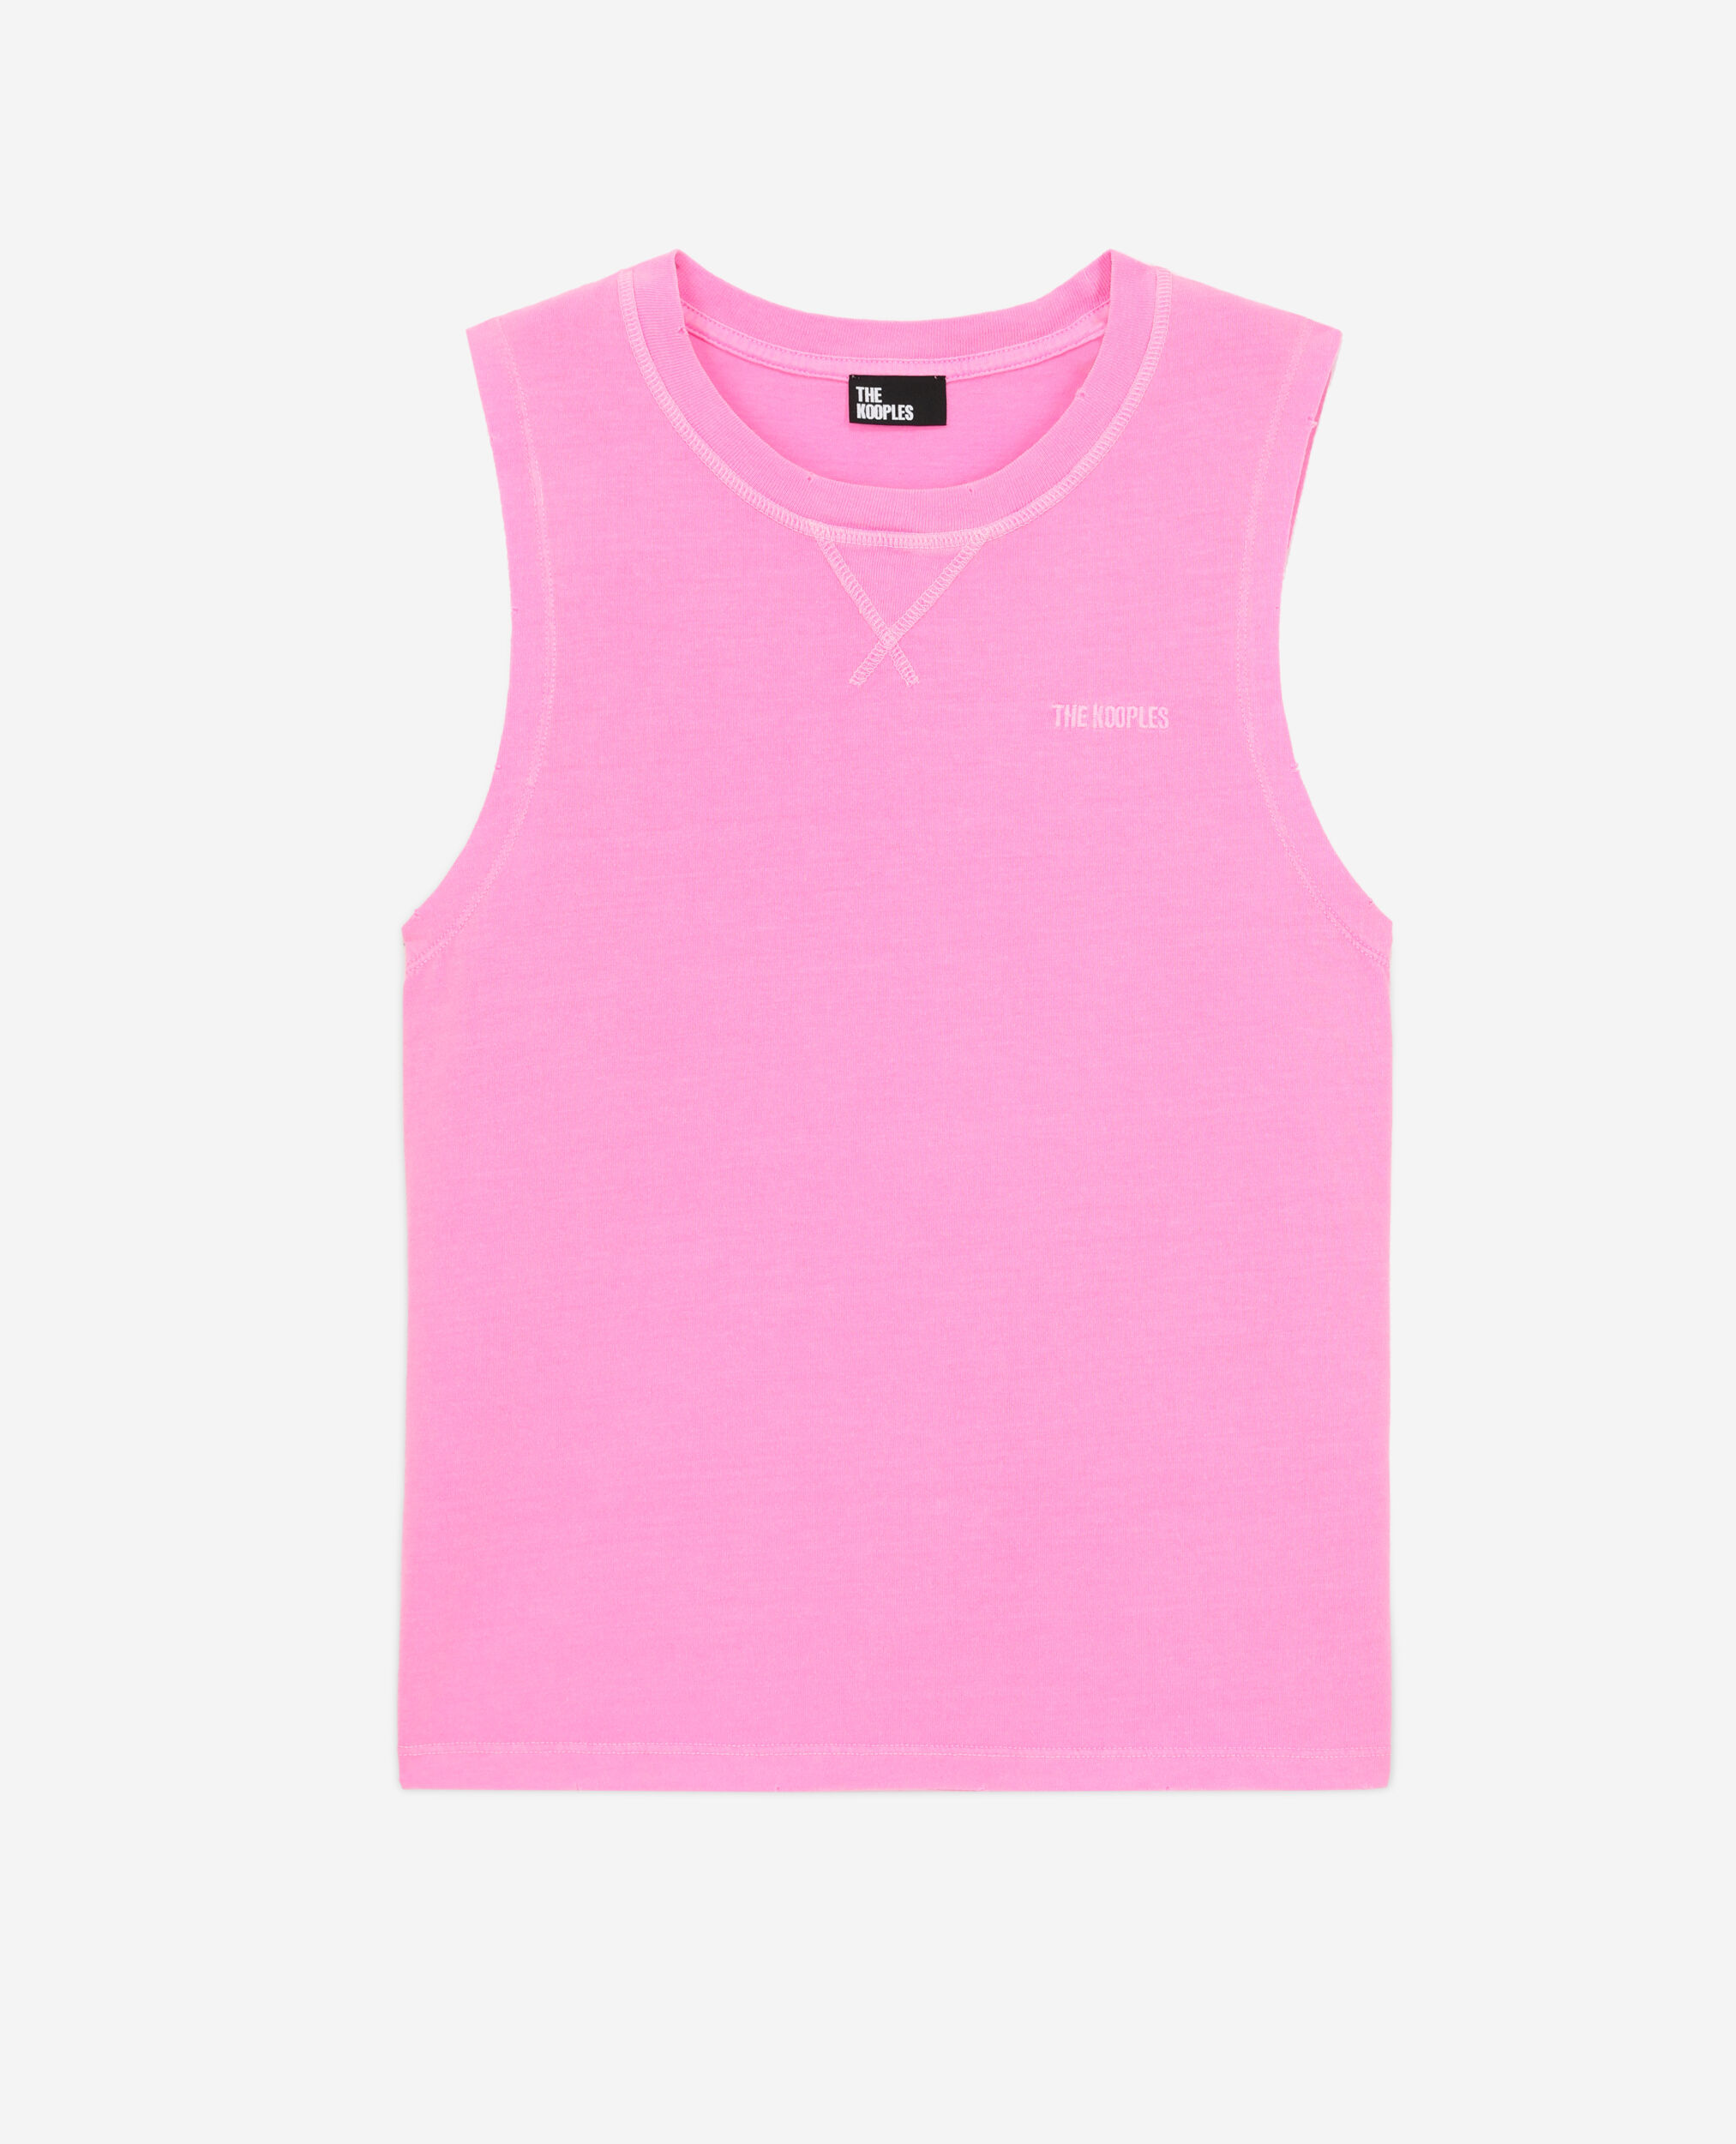 Women's fluorescent pink t-shirt with logo, FLUO PINK, hi-res image number null